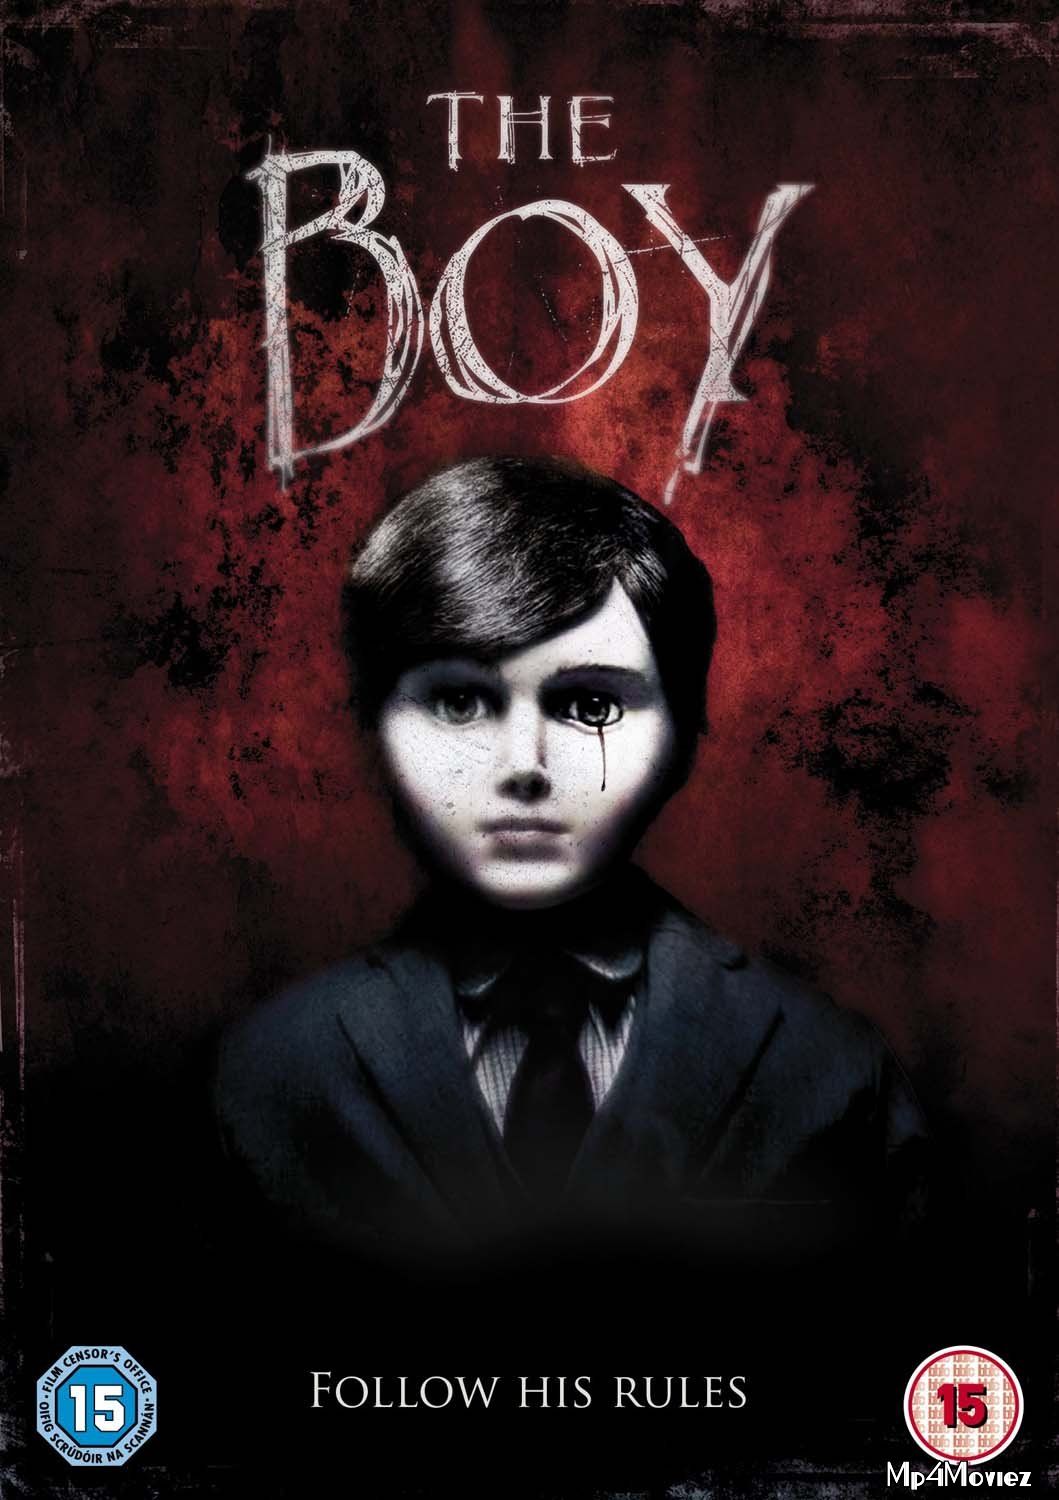 The Boy 2016 Hindi Dubbed Movie download full movie